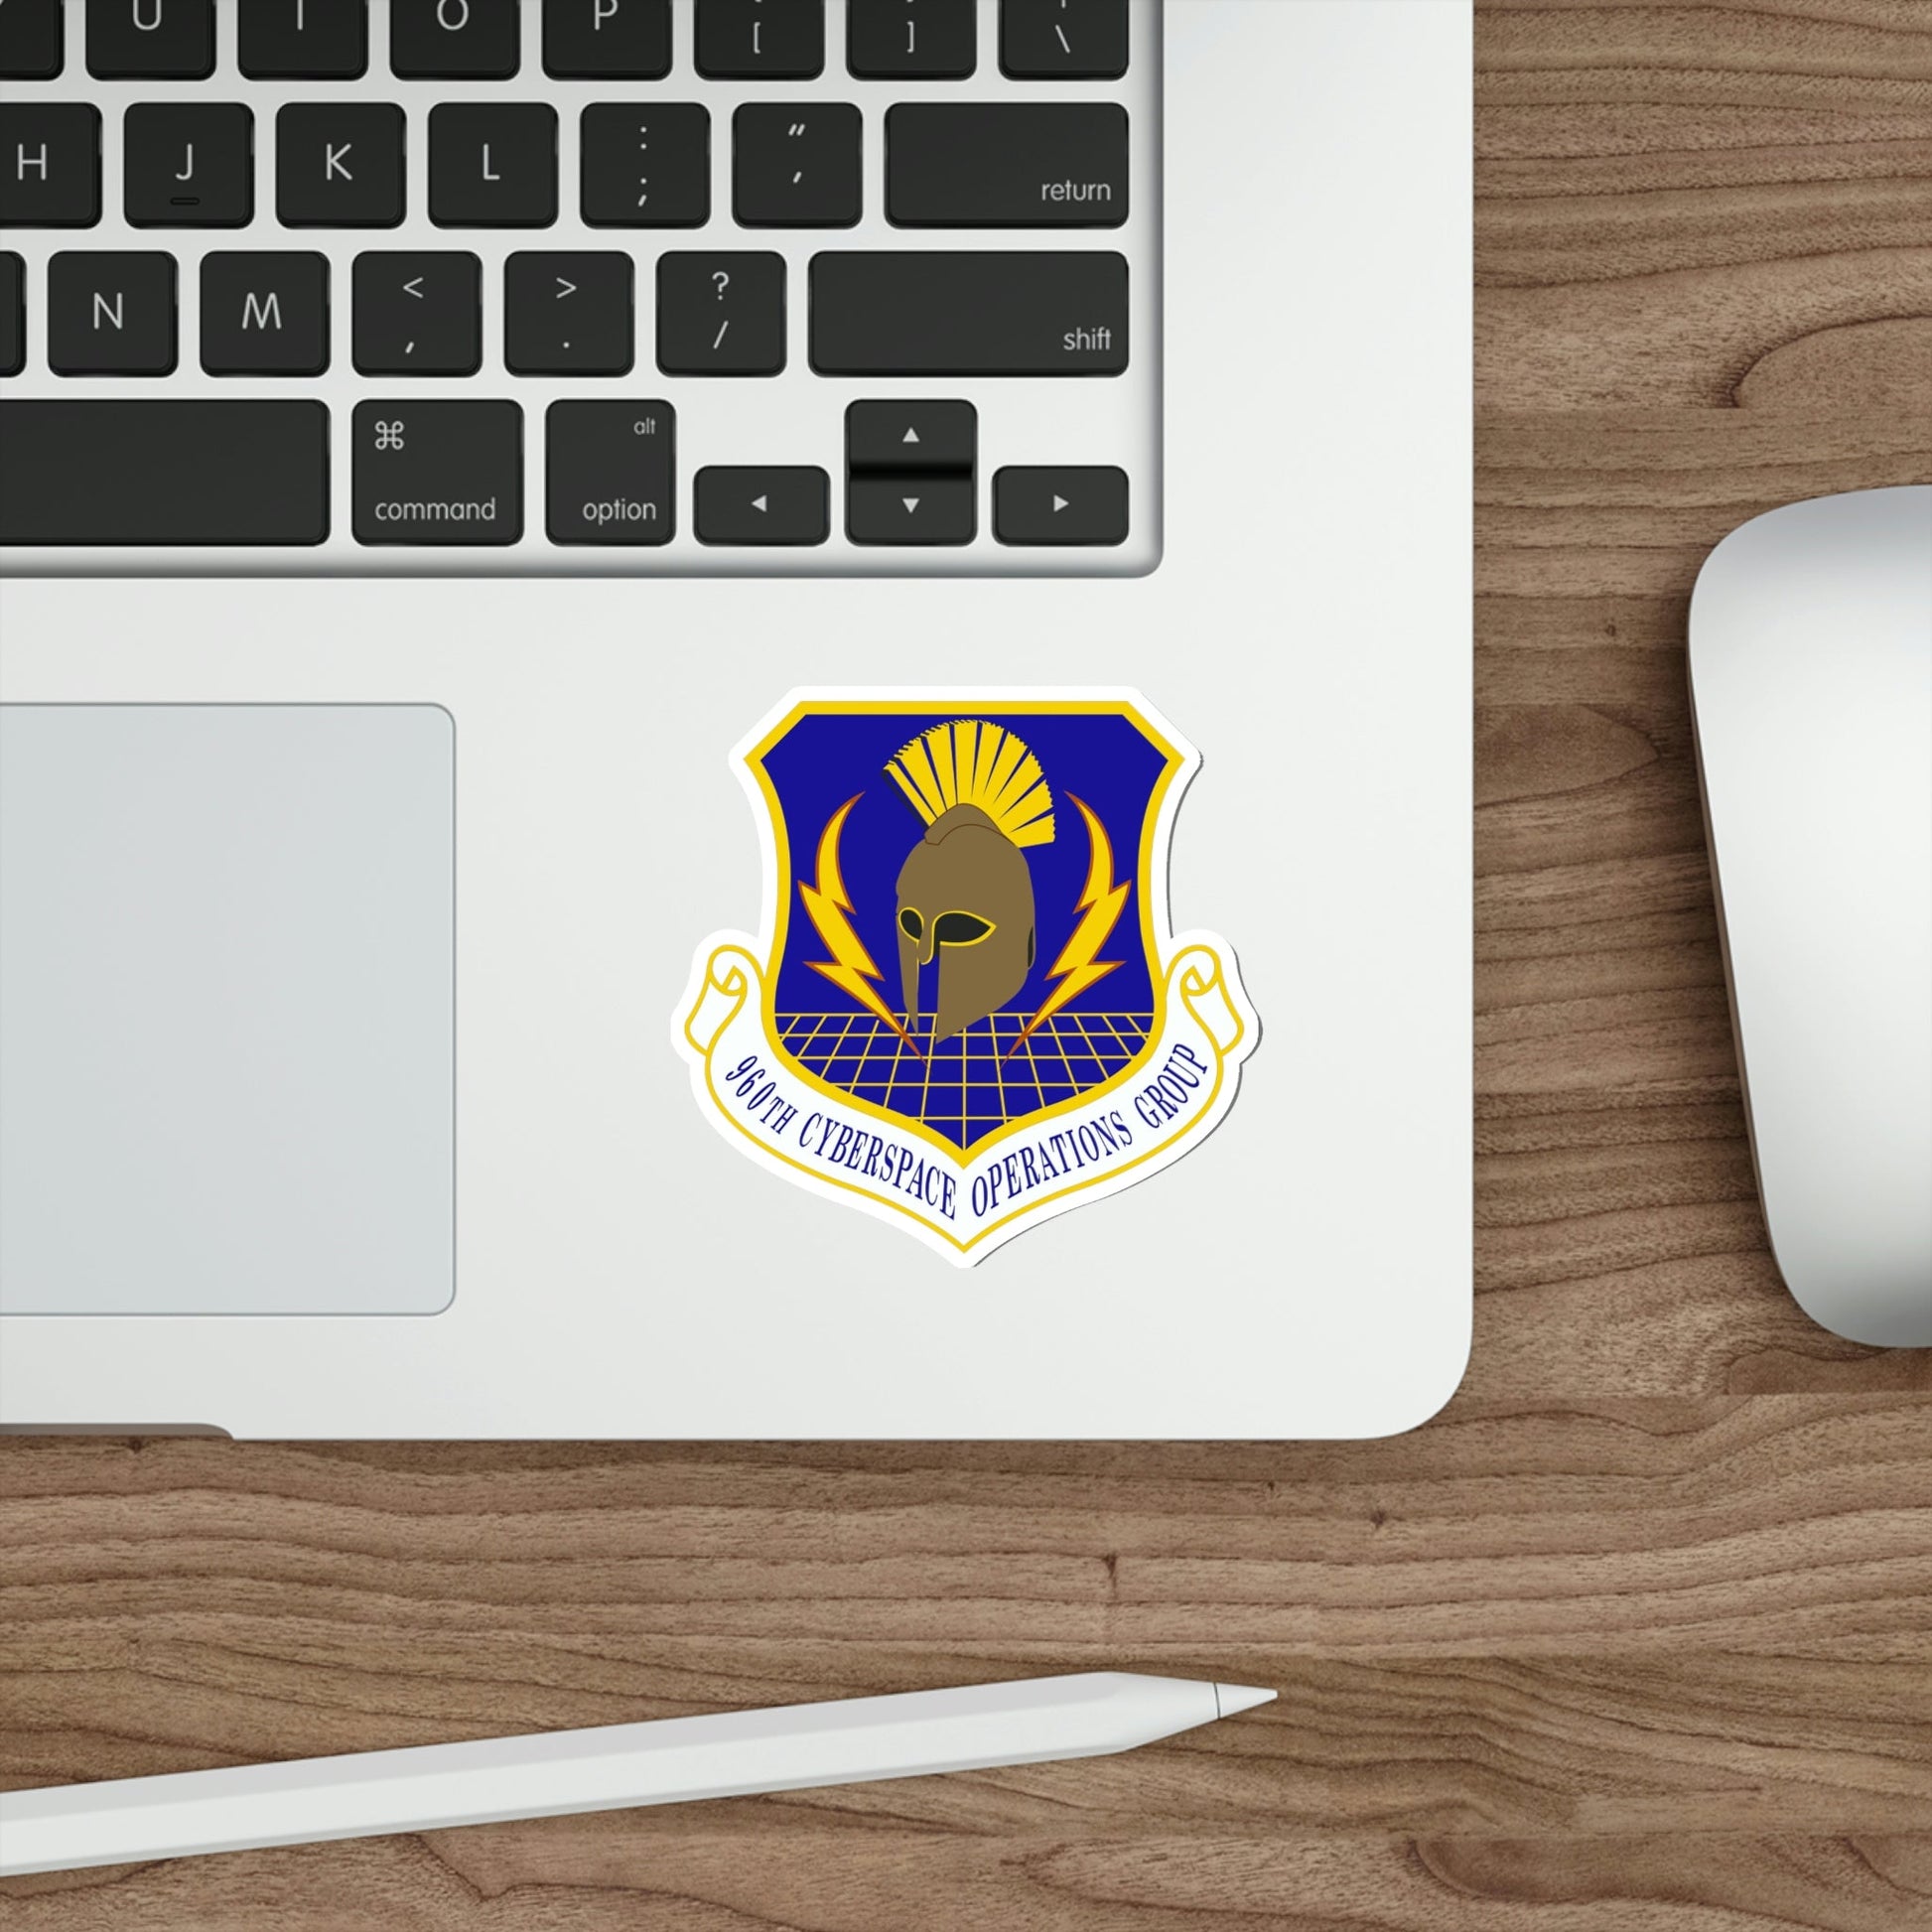 960th Cyberspace Operations Group (U.S. Air Force) STICKER Vinyl Die-Cut Decal-The Sticker Space